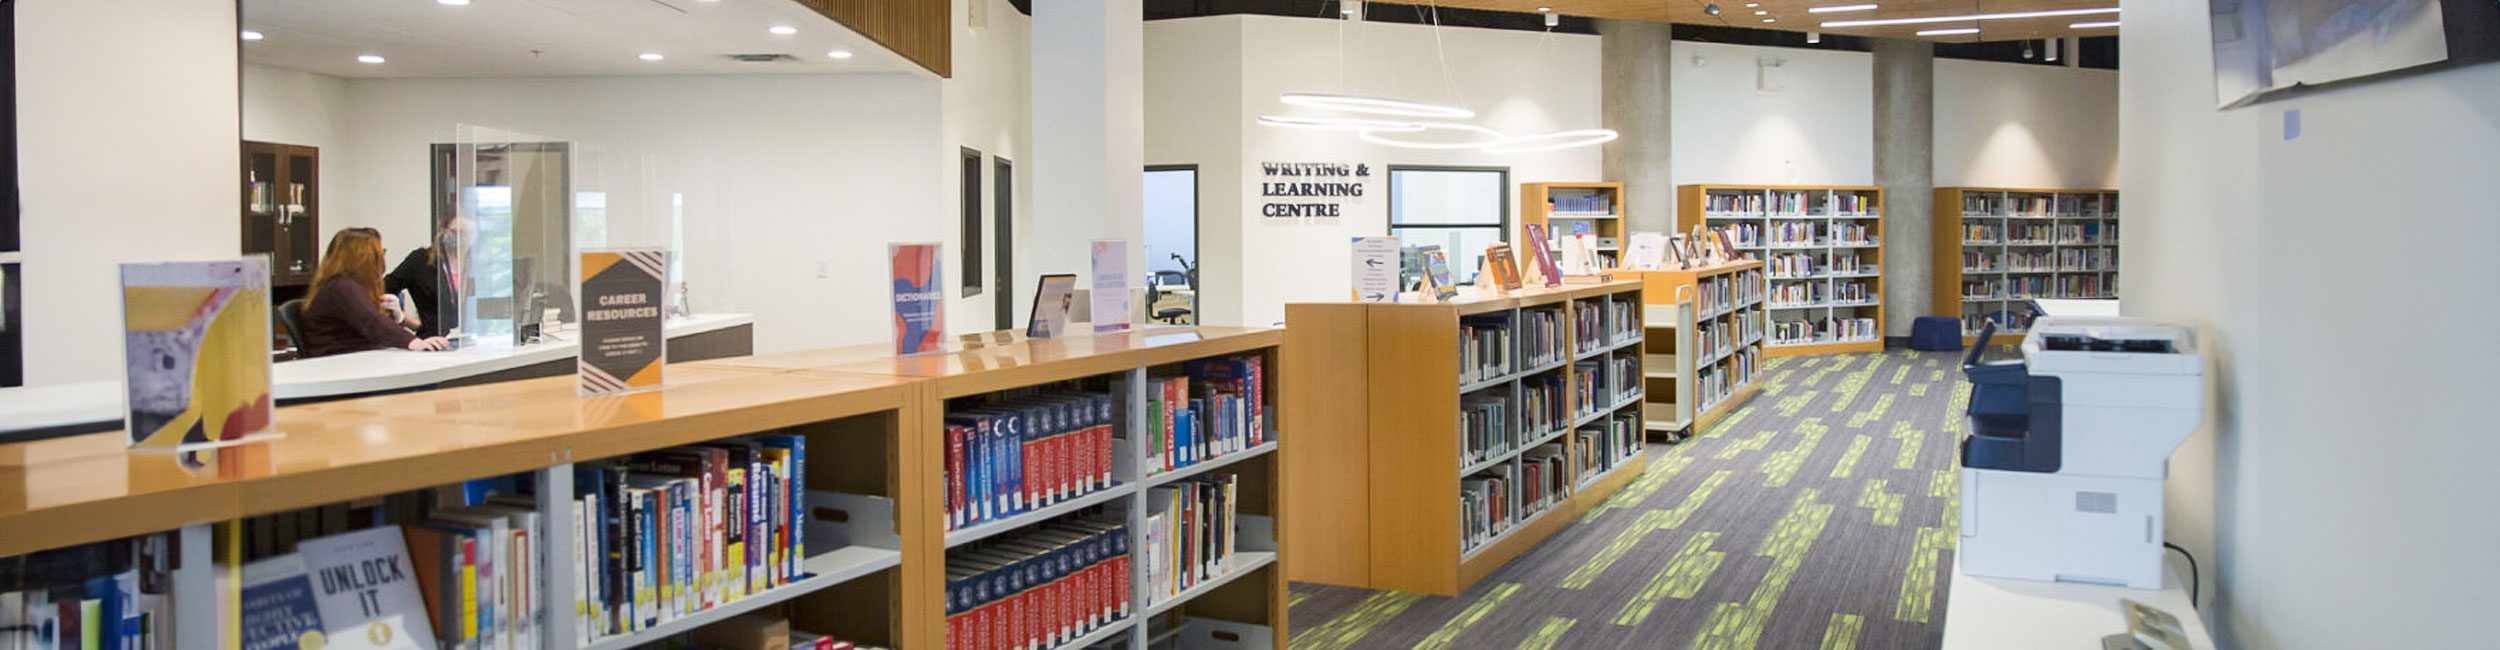 Alexander College Library at Burnaby campus